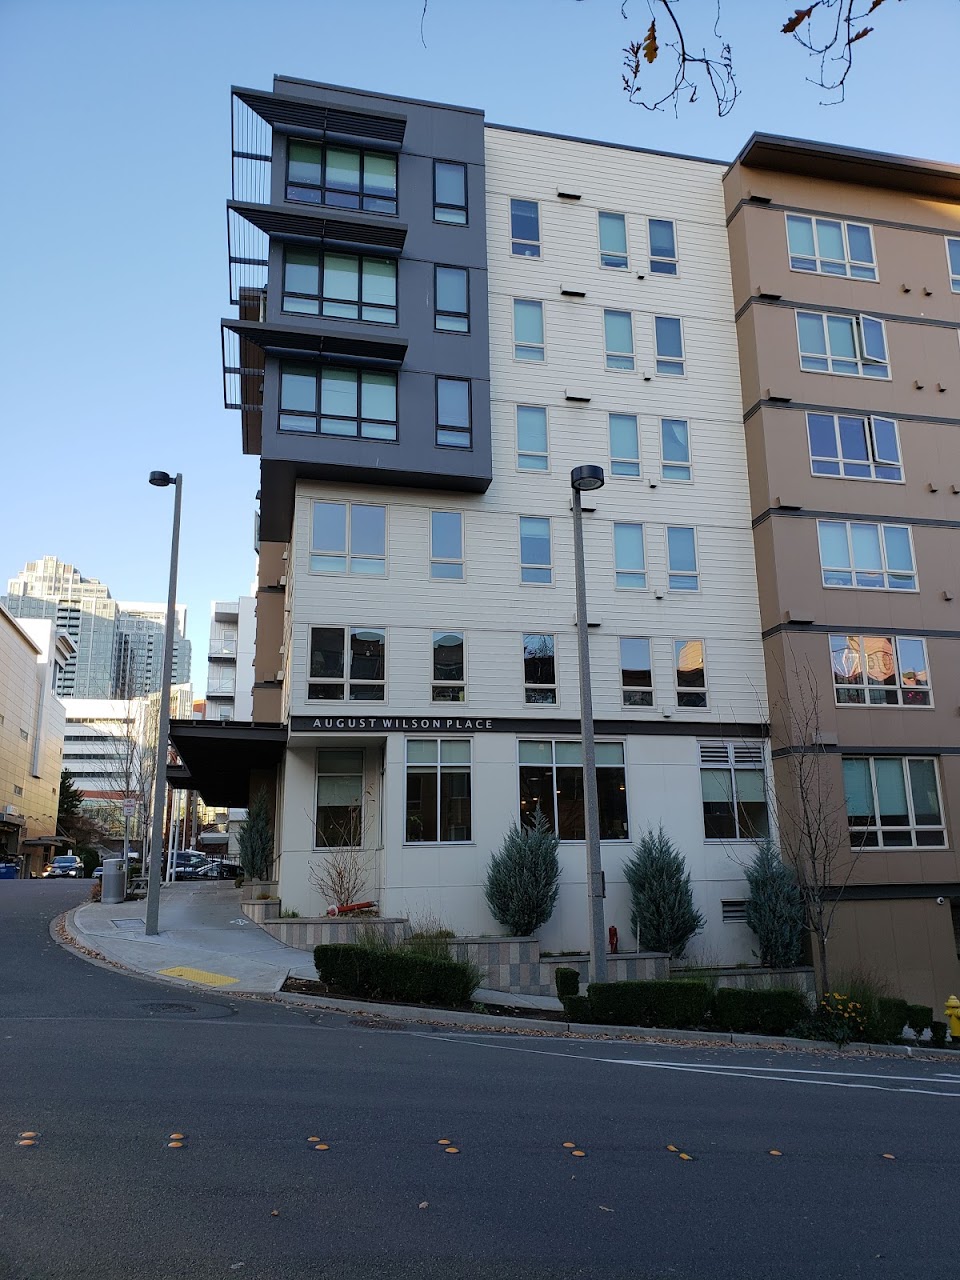 Photo of AUGUST WILSON PLACE. Affordable housing located at 204 111TH AVENUE NE BELLEVUE, WA 98004